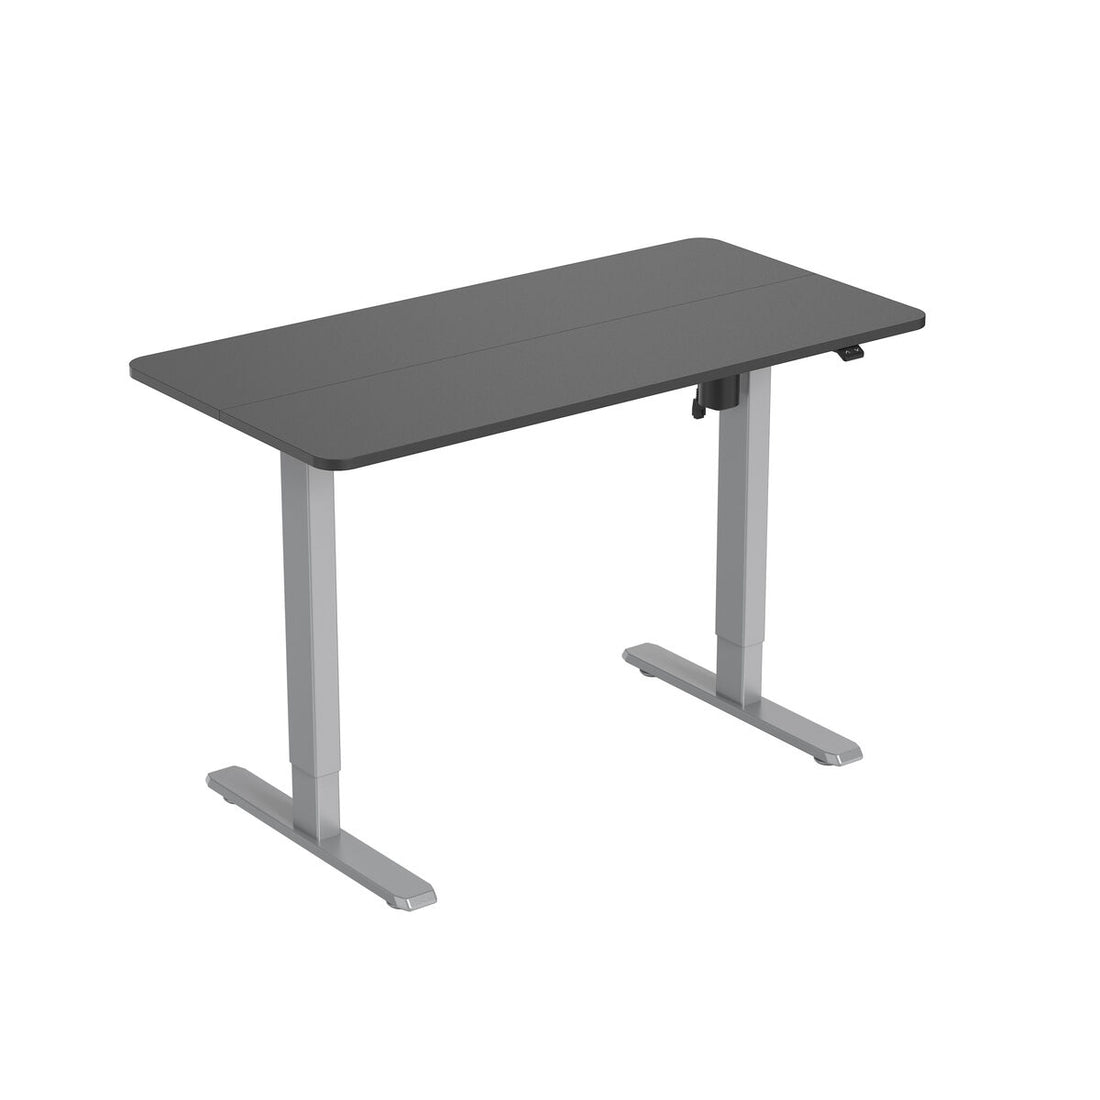 EQUIP ERGO ELECTRIC SIT-STAND DESK FRAME WITH DESKTOP GRAY